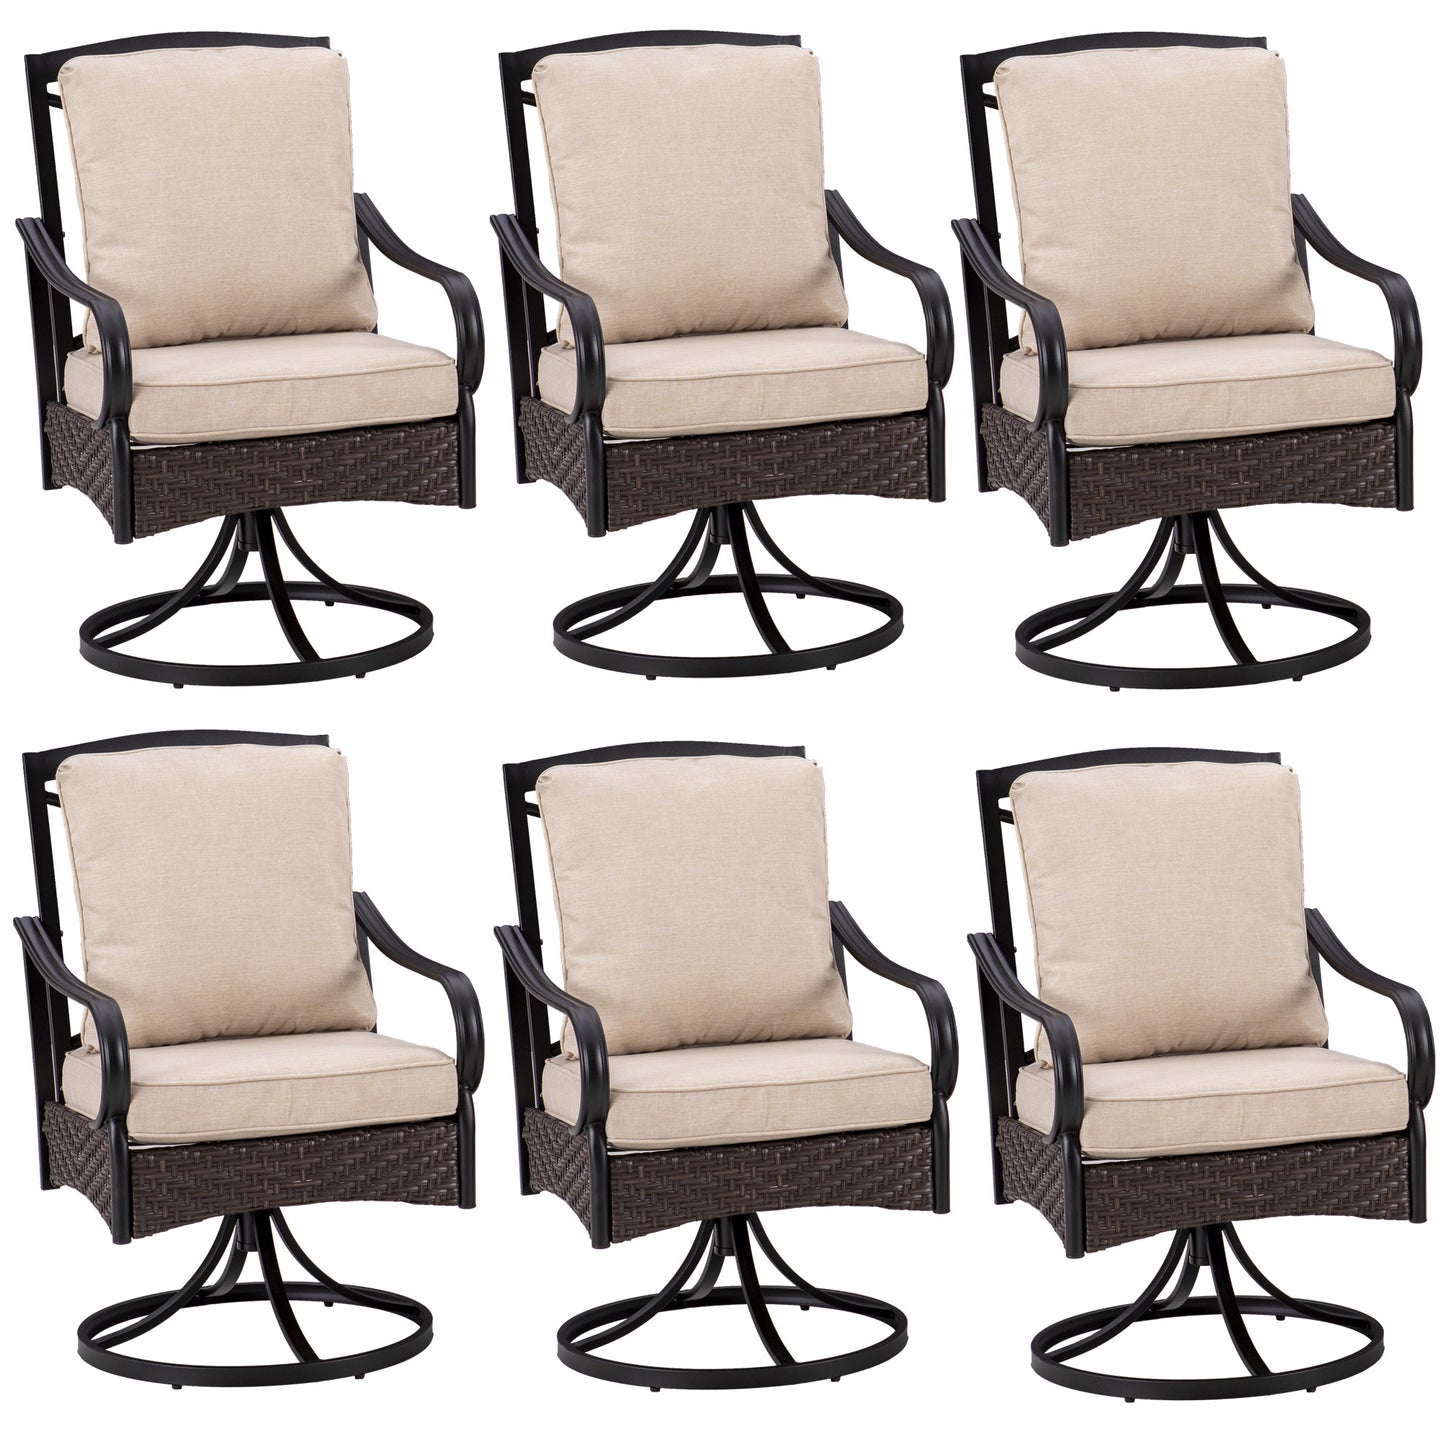 Sophia&William Patio Rattan Swivel Chairs Set of 6 with Beige Cushions